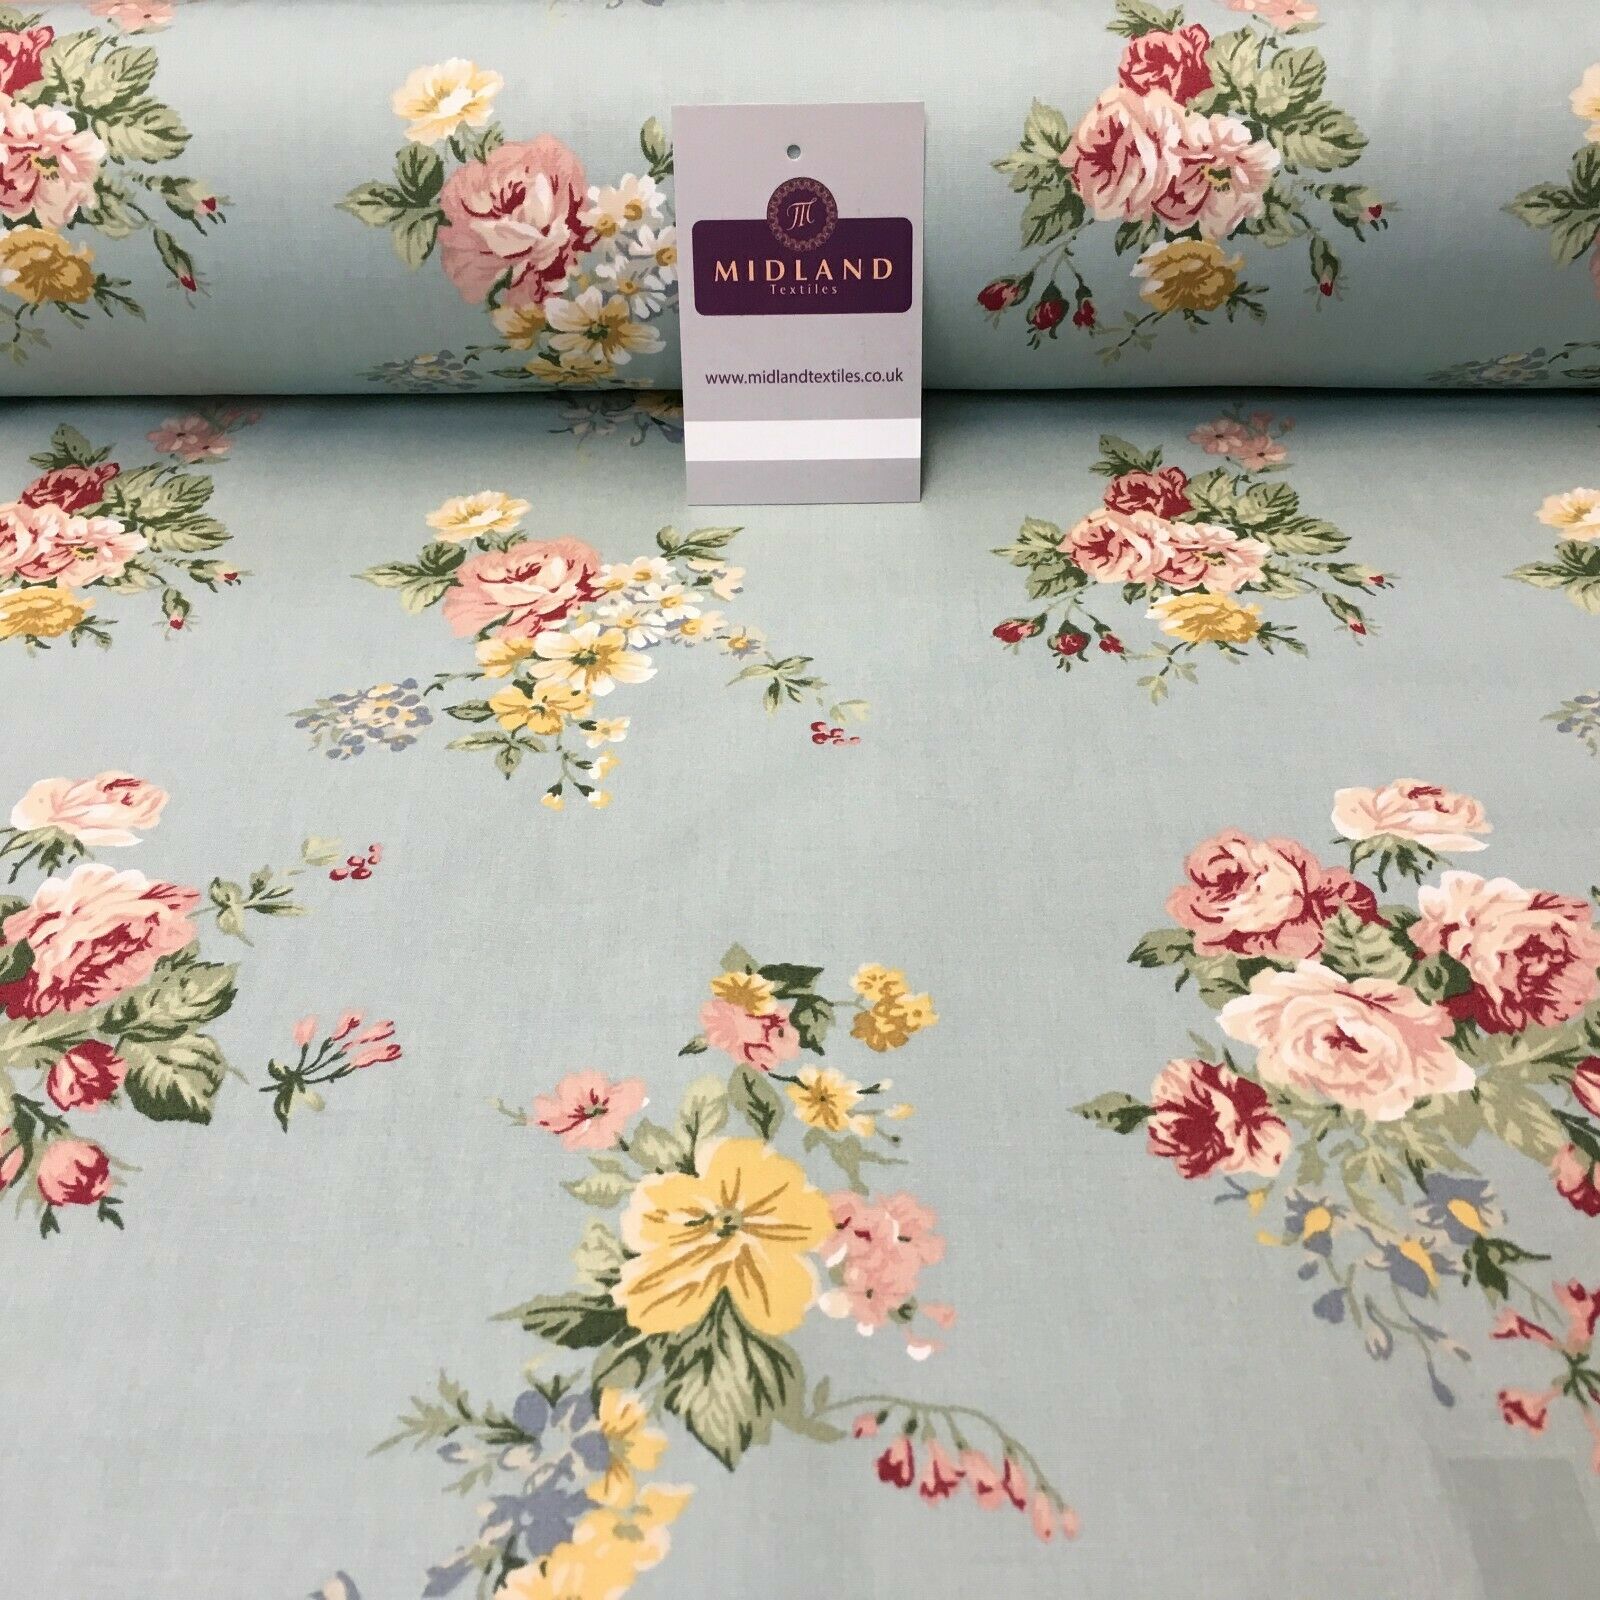 Floral Vintage Rose Shabby Chic Cotton Poplin Printed Fabric 110cm Wide MK1083